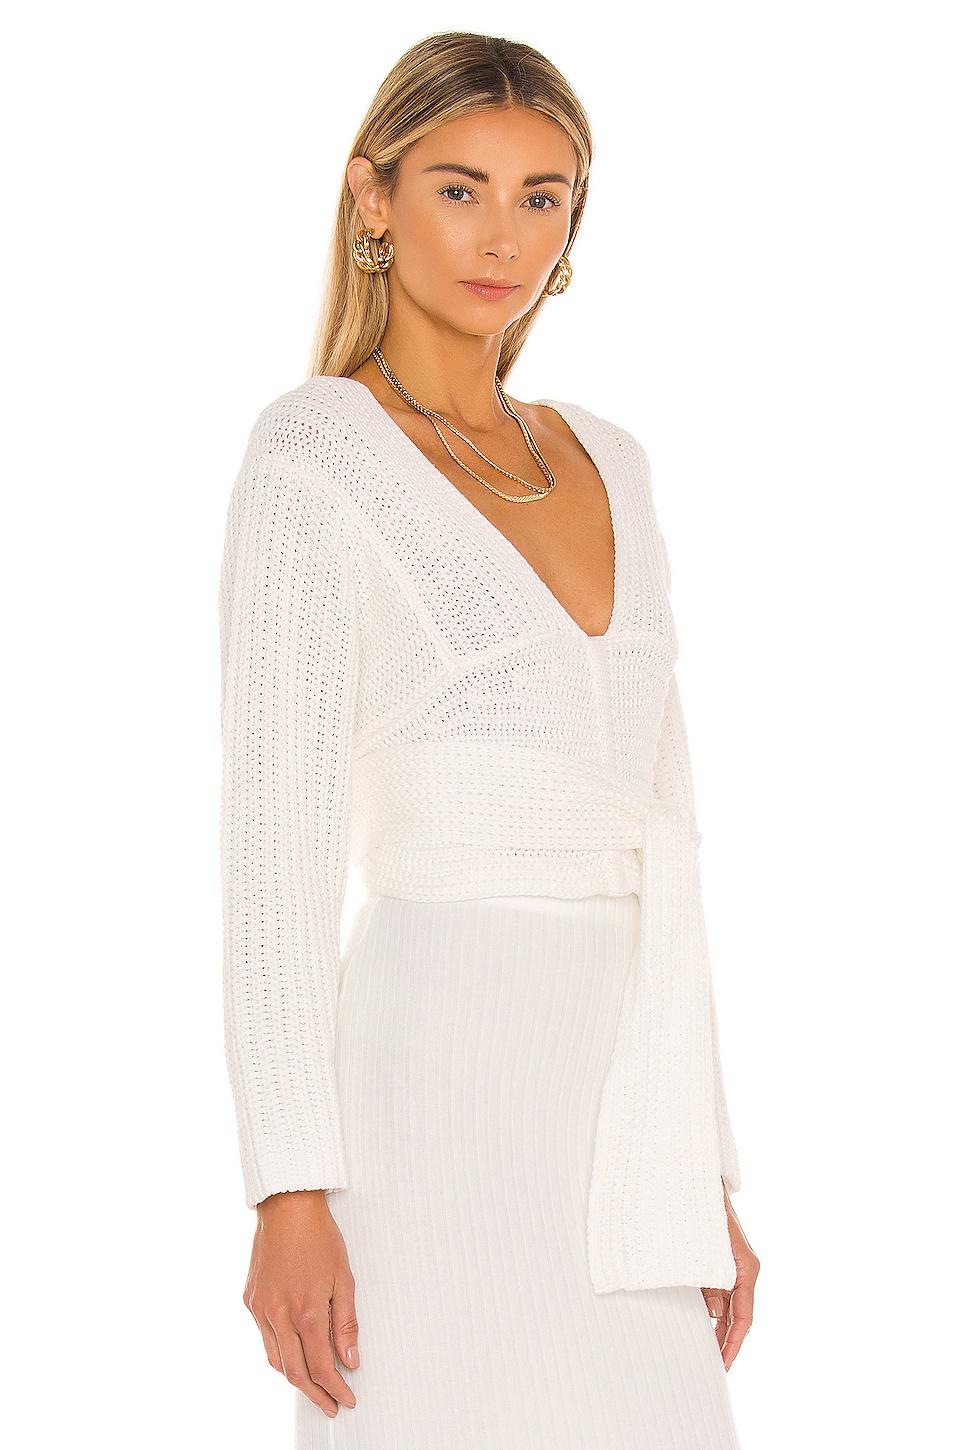 ATOIR Cotton Perfect Game Knit Sweater in White - Lyst